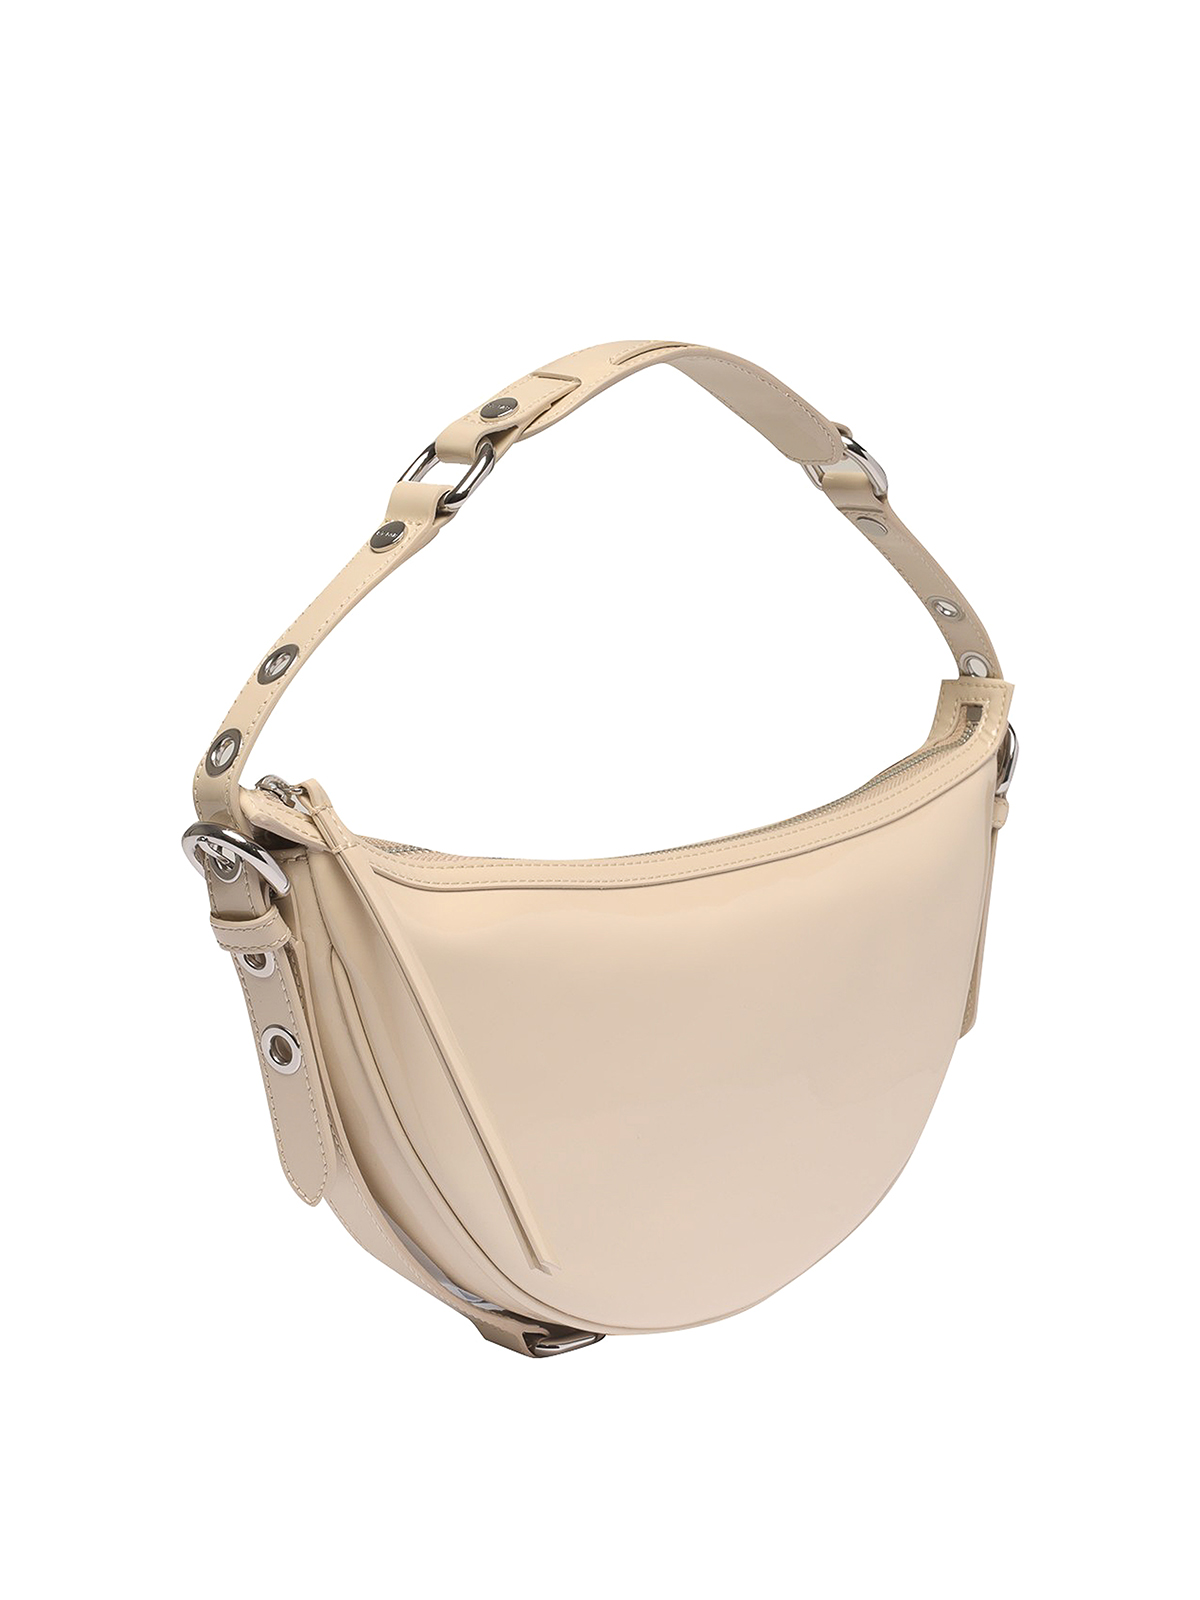 By FAR Shoulderbag RACHEL Patent leather online shopping 